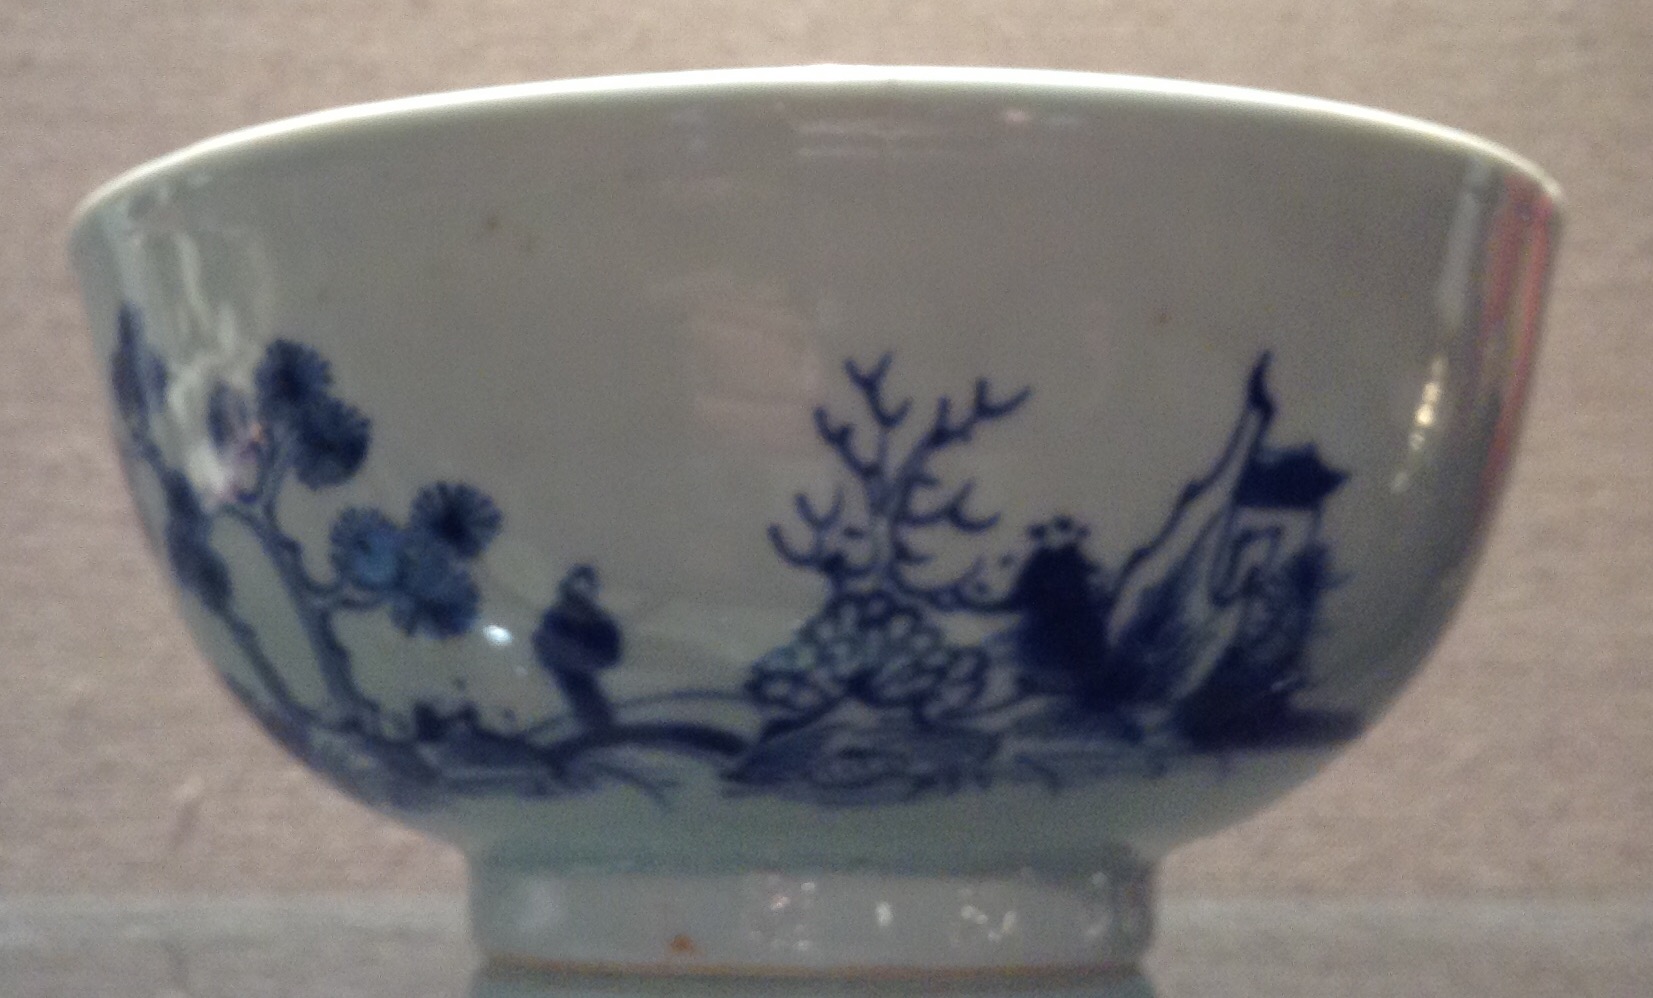 NANKING CARGO, AN 18TH CENTURY CHINESE PORCELAIN BOWL Hand painted in underglaze blue and